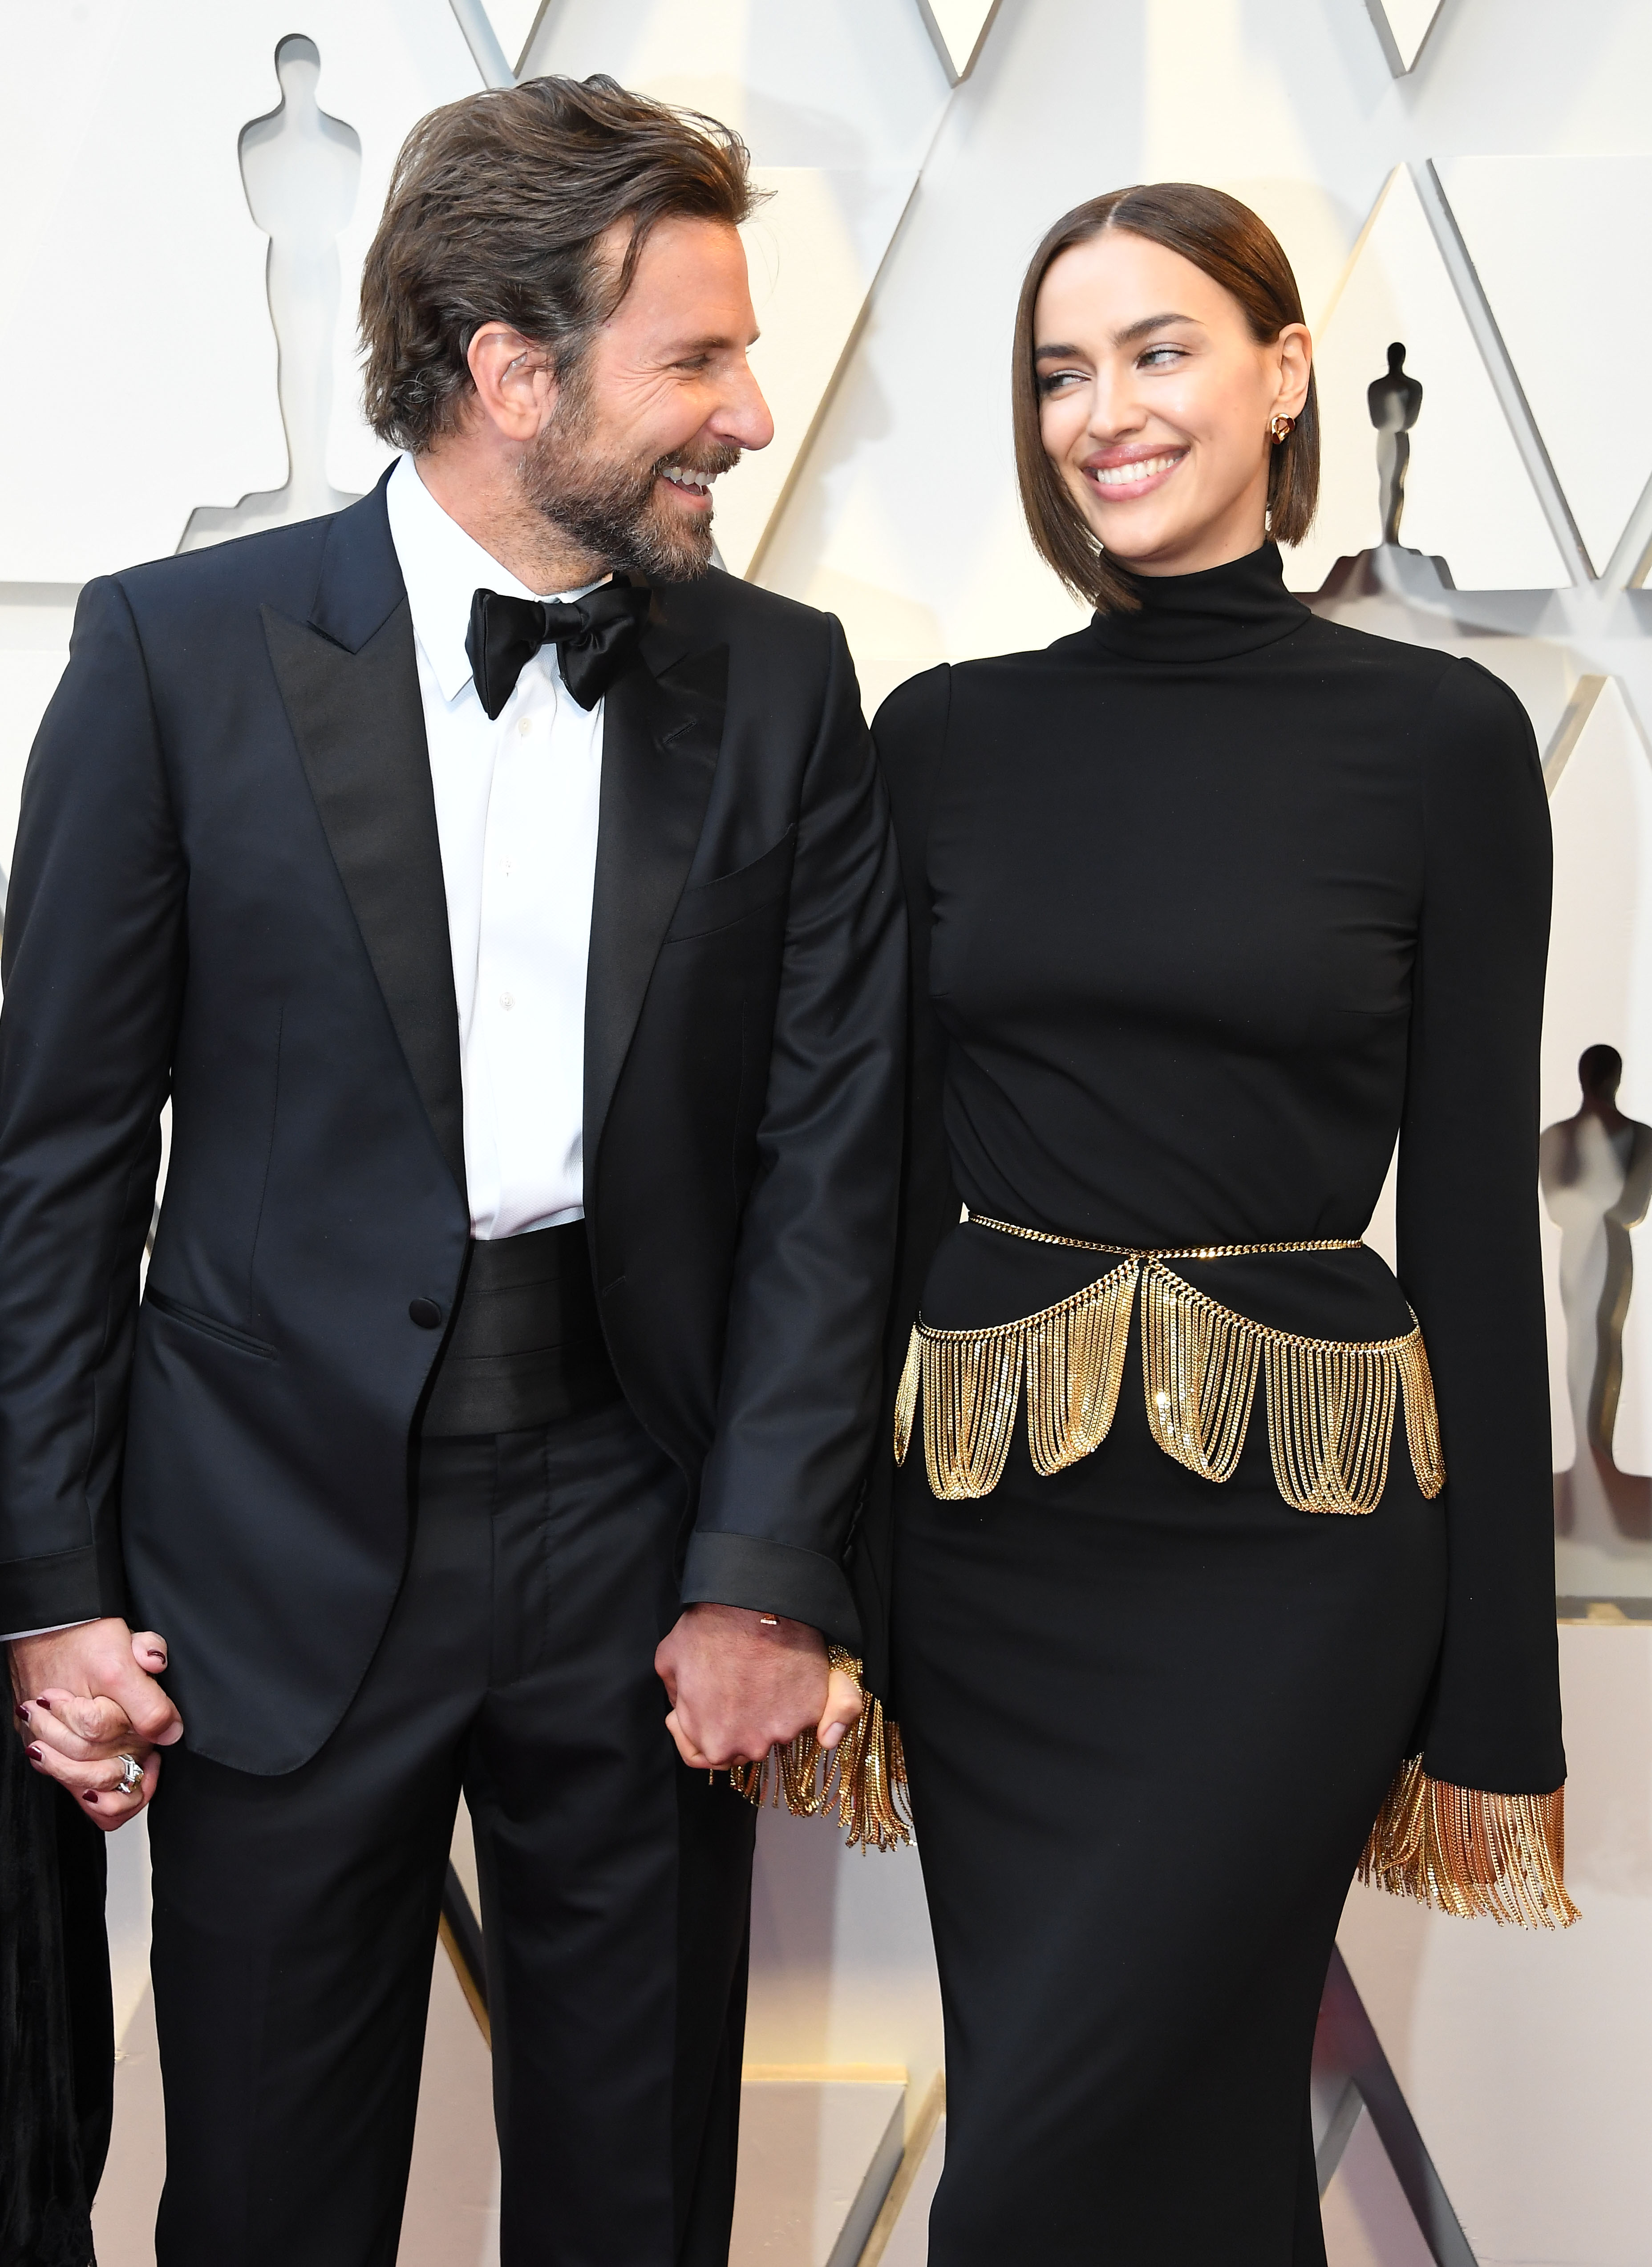 Bradley Cooper and Irina Shayk in Hollywood, California on February 24, 2019 | Source: Getty Images